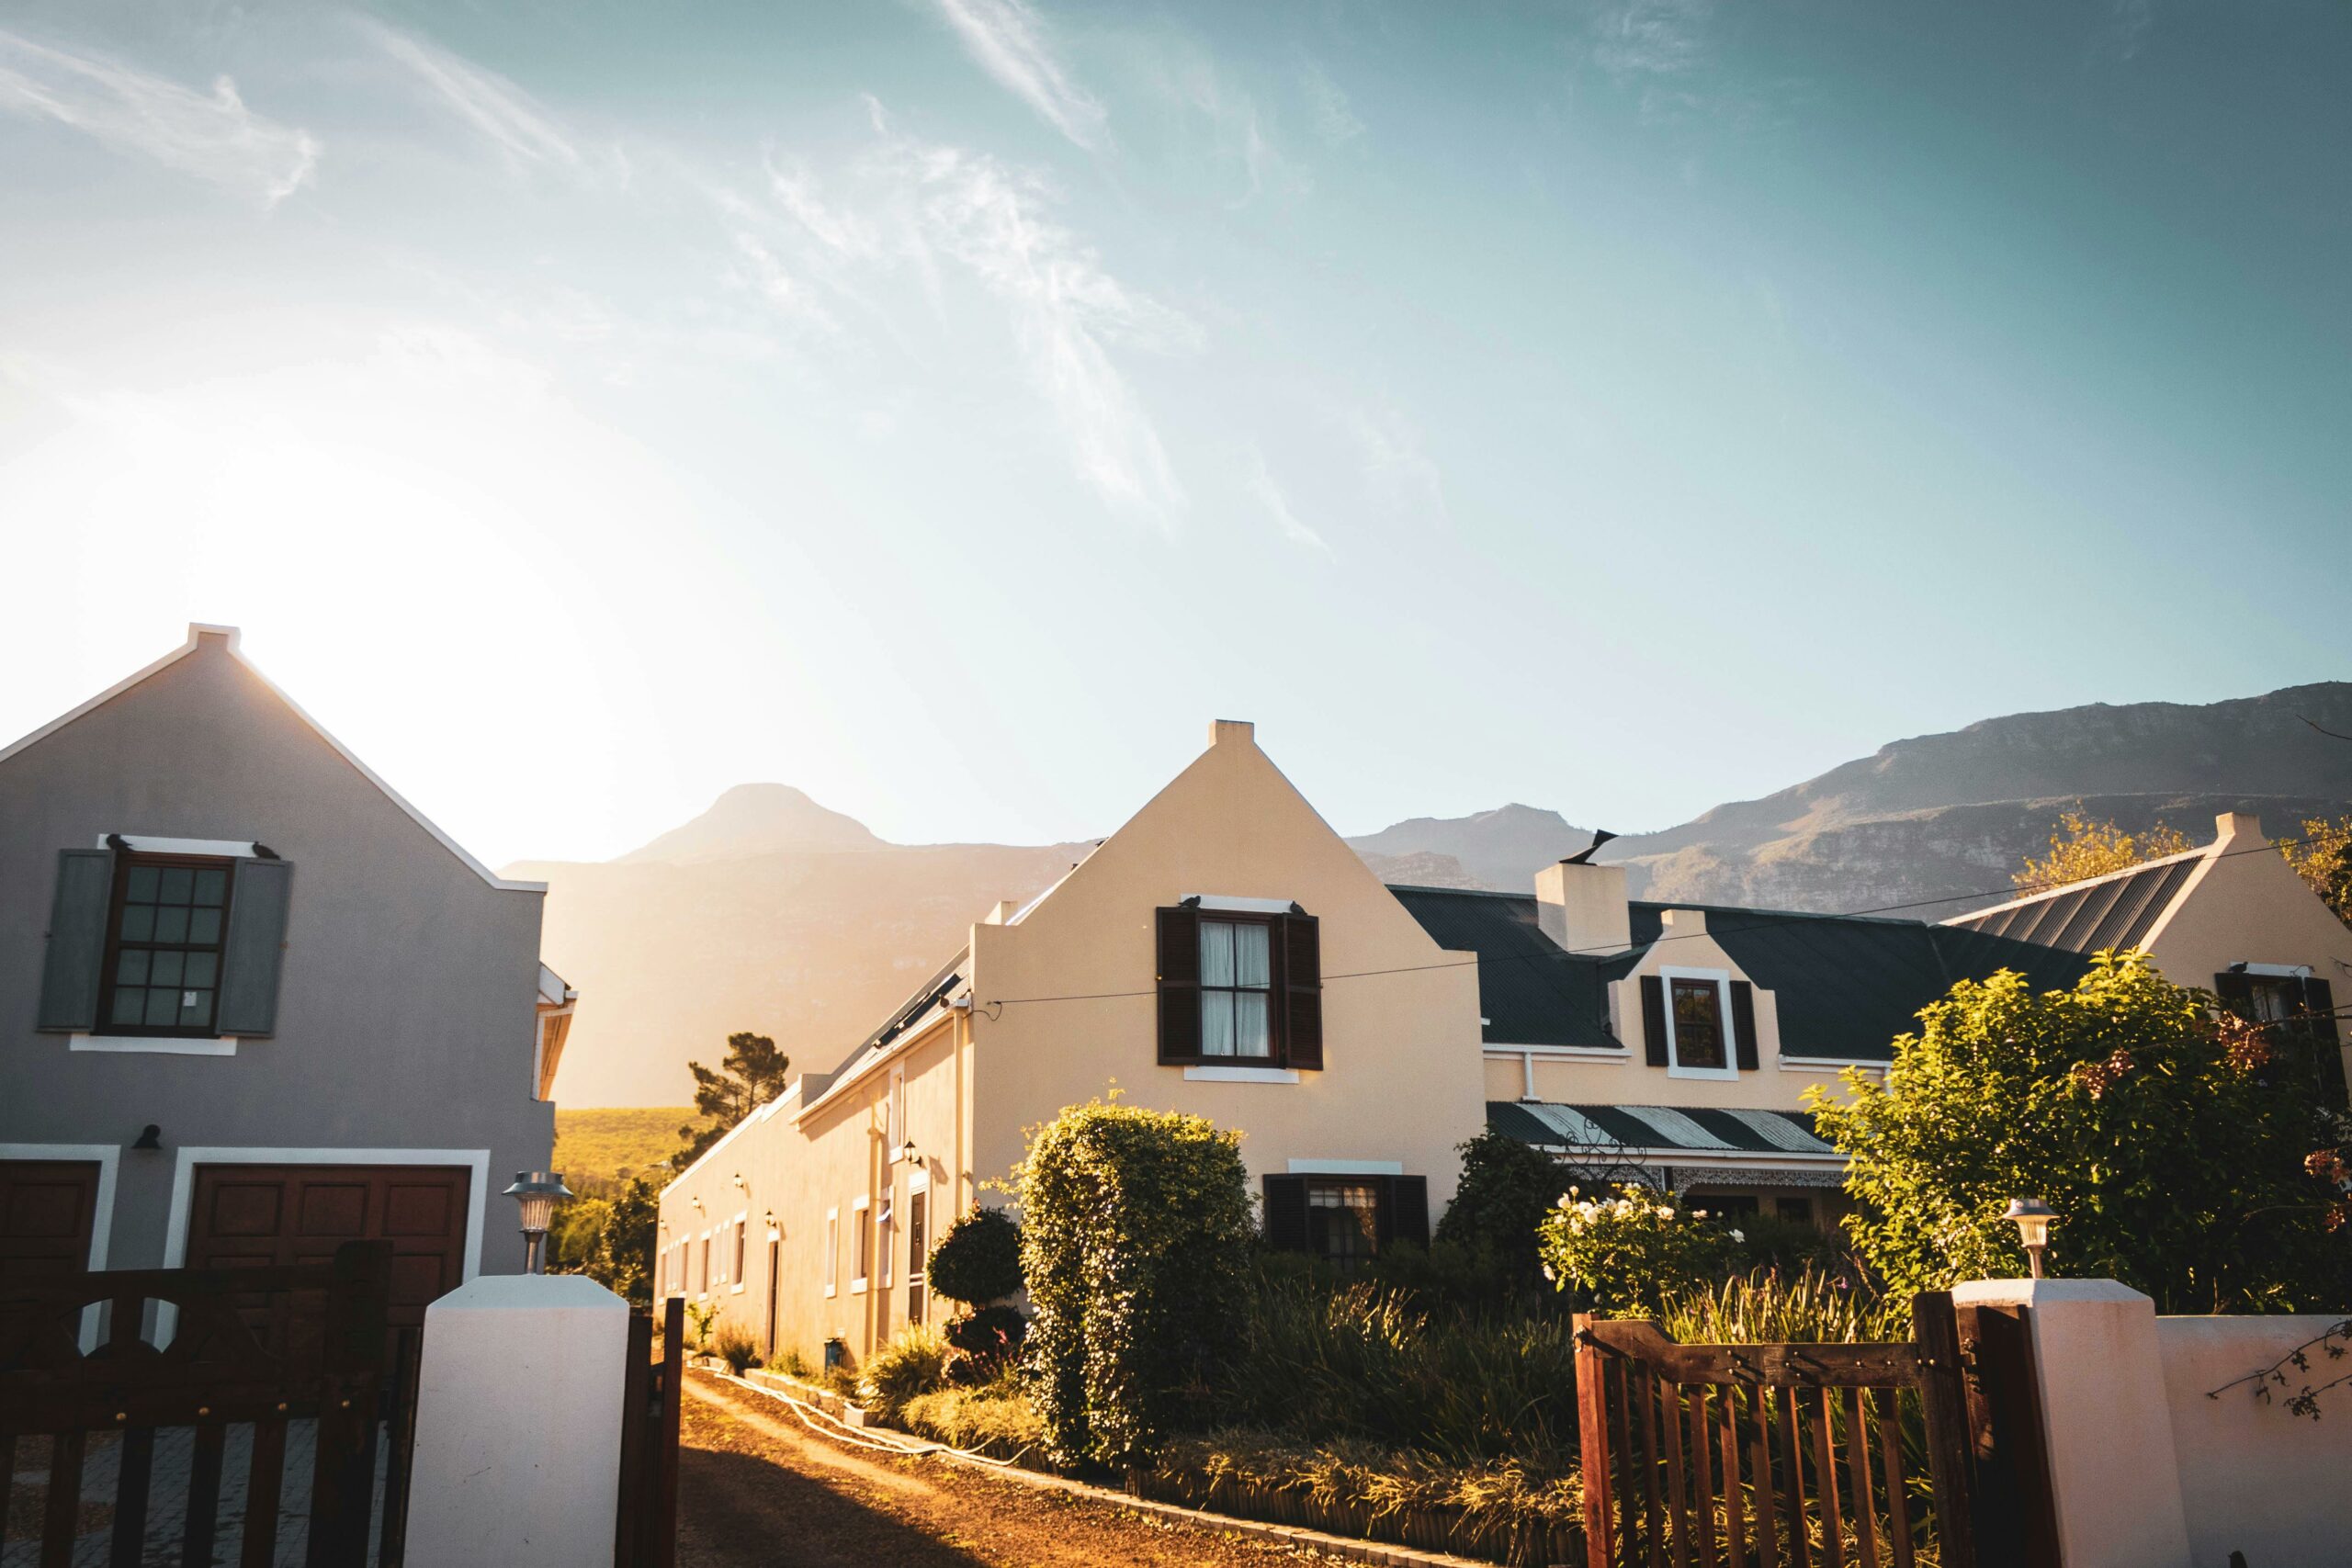 Sunrise over a picturesque suburban street with modern houses against a mountain backdrop.